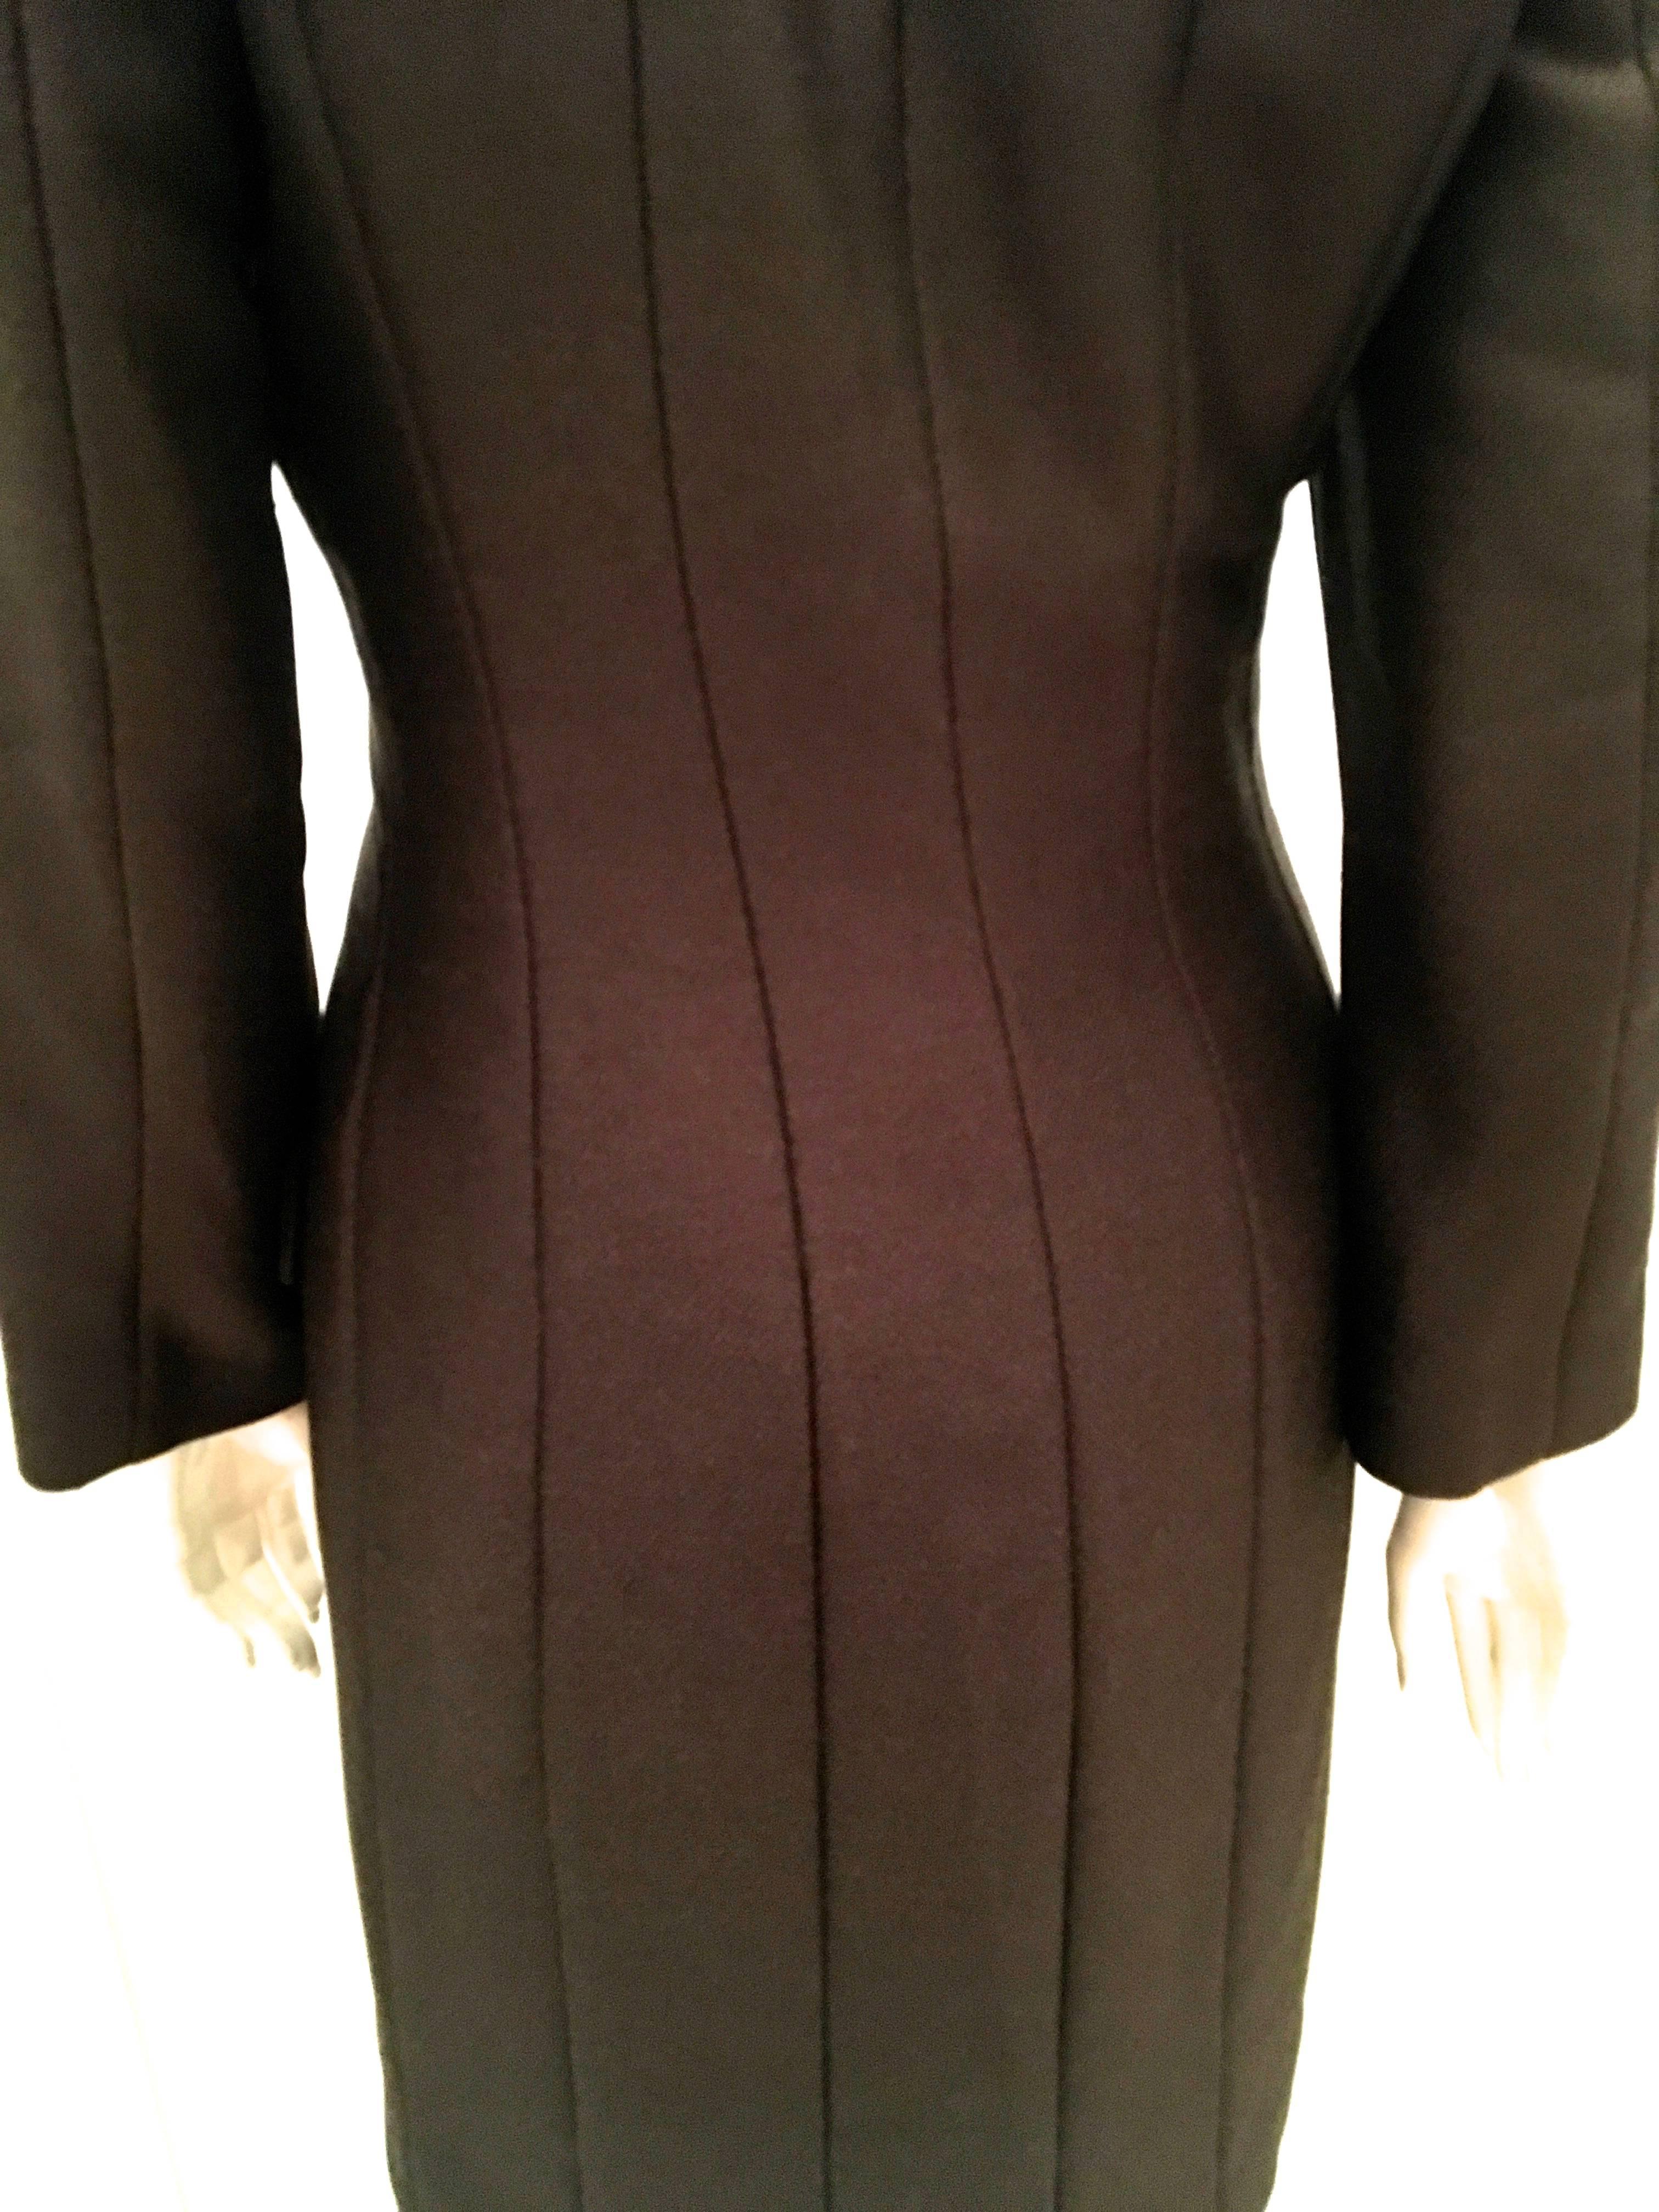 Chanel Coat w/ Matching Dress - Mint Condition - Absolutely Flawless For Sale 4